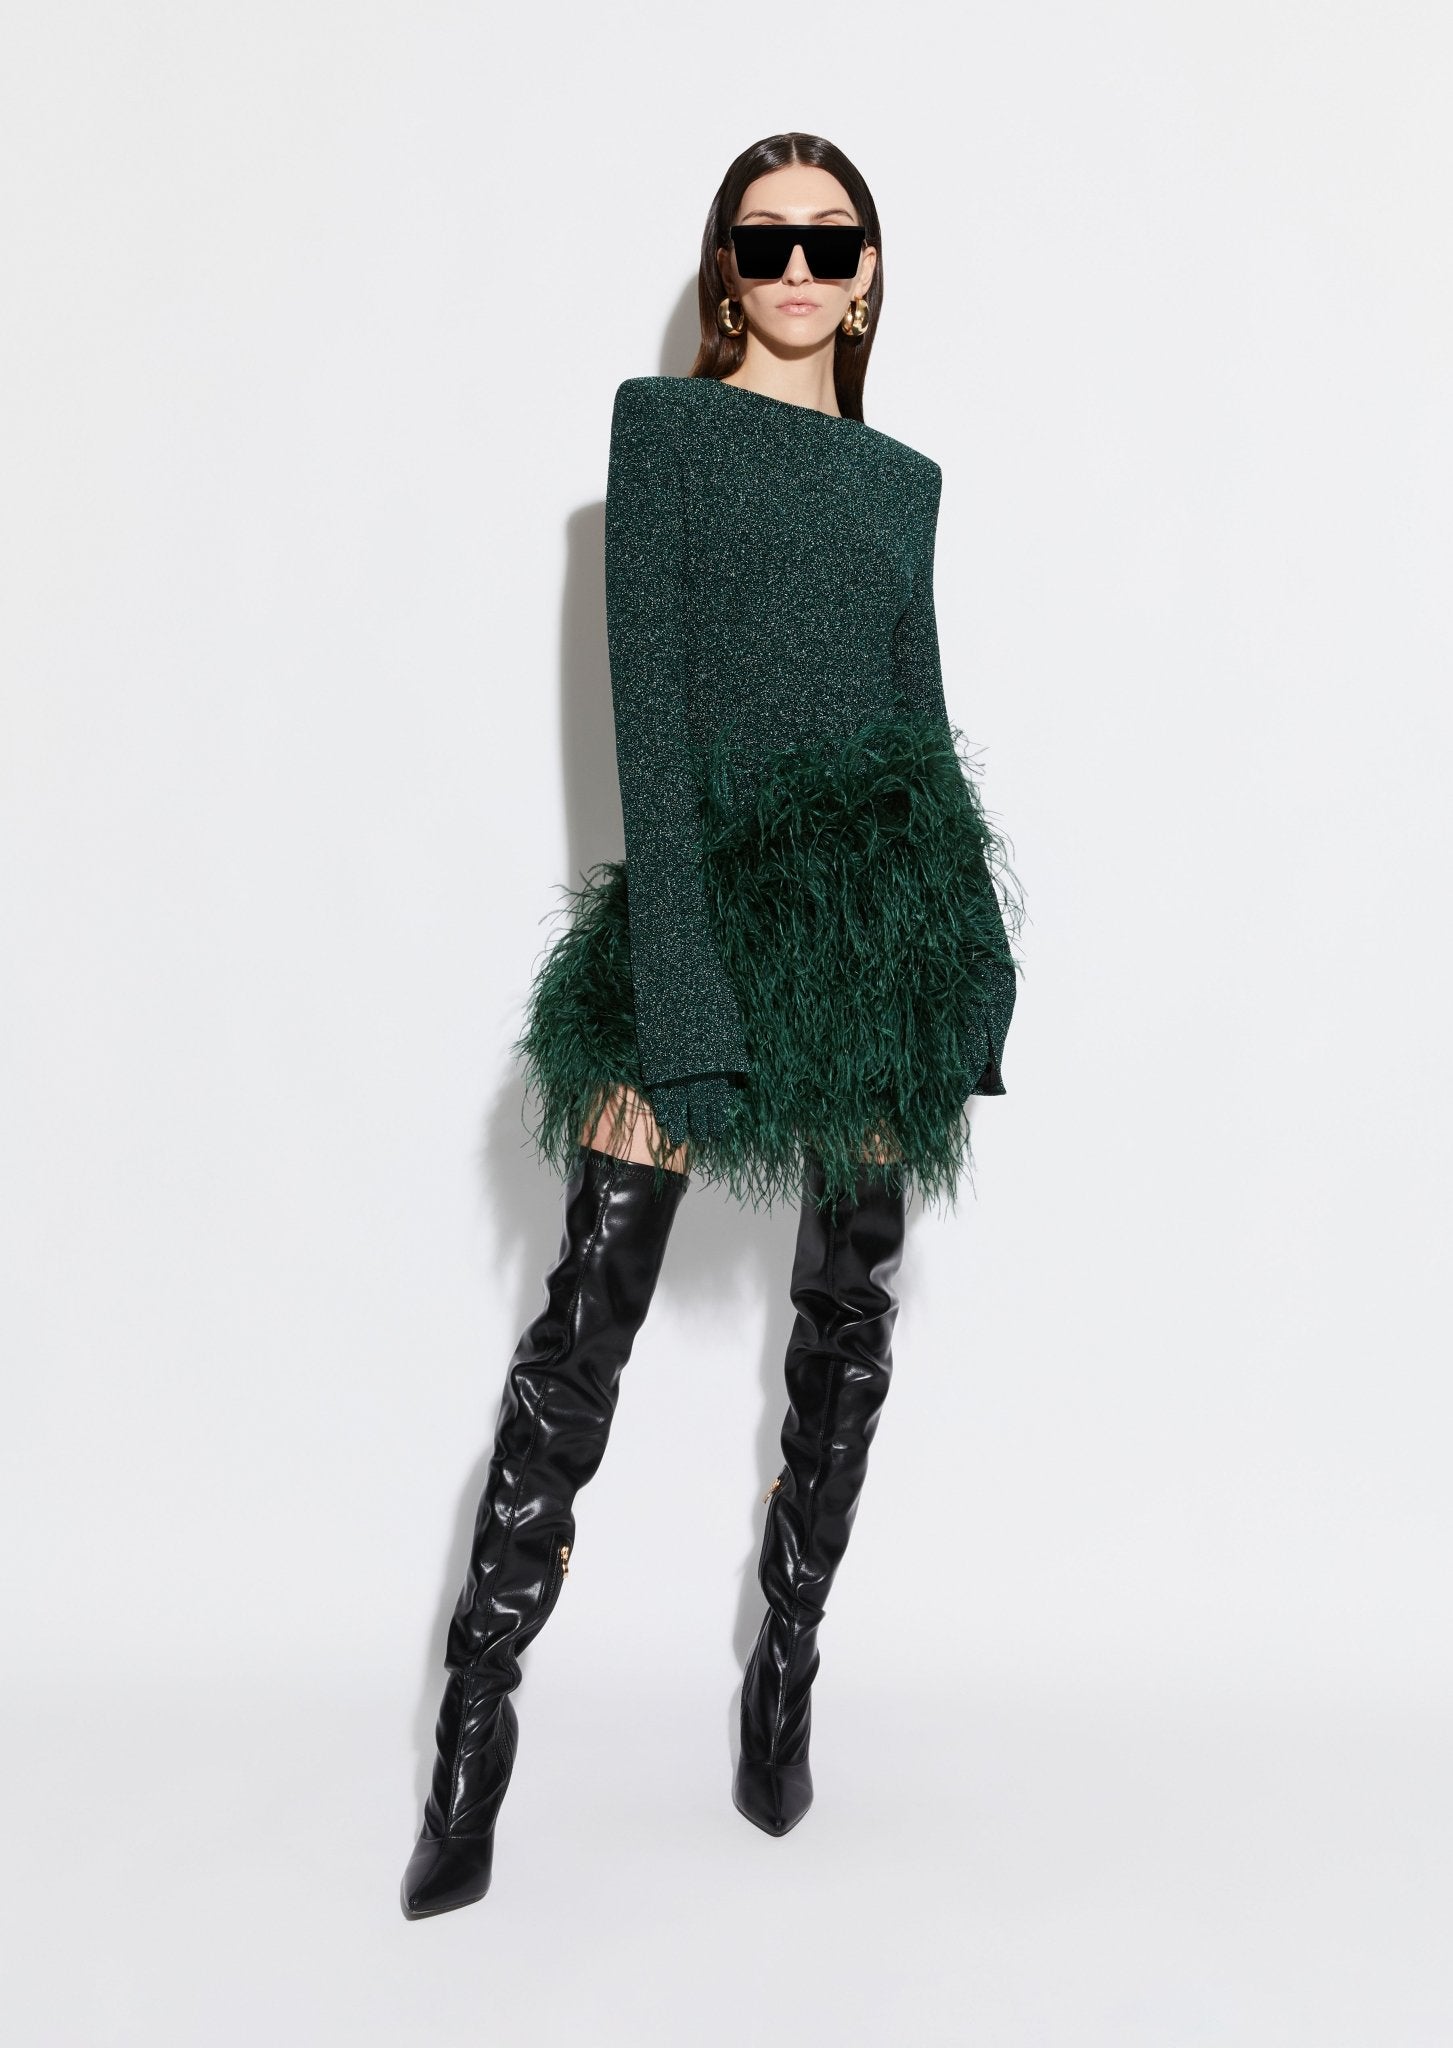 Metallic Jersey Dress With Feathers in Emerald | LAPOINTE